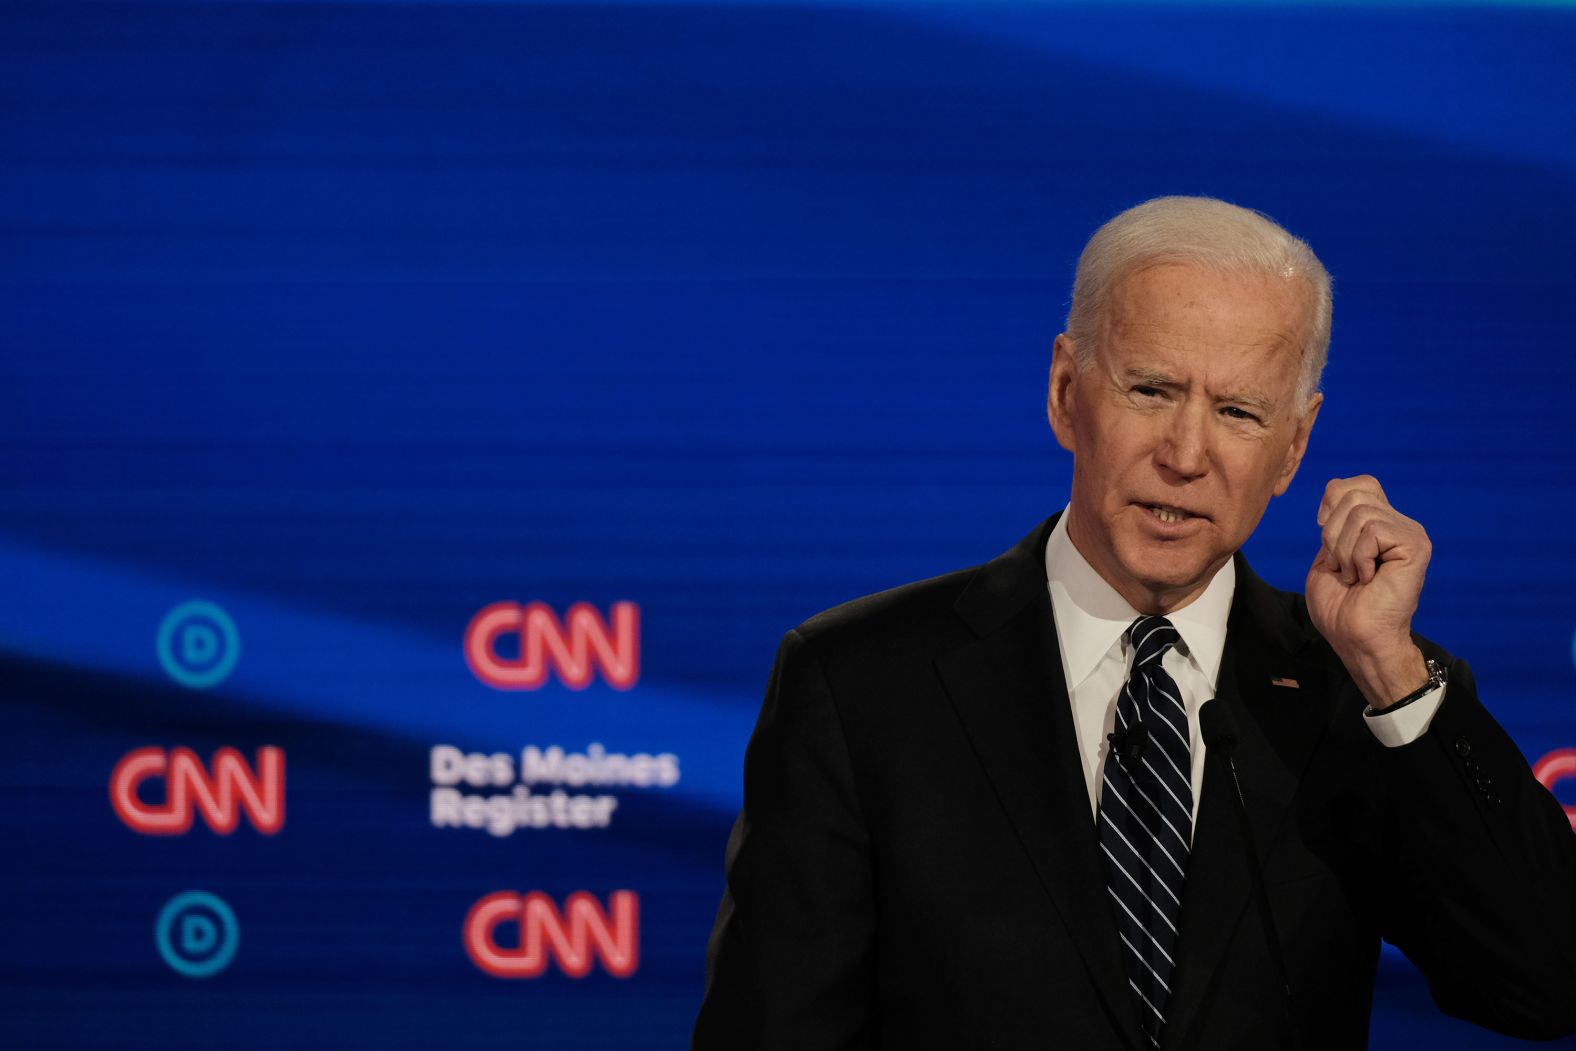 Biden was asked if it would be harder to run against President Donald Trump if he's acquitted in a Senate impeachment trial.<br />"It's irrelevant," <a href="index.php?page=&url=https%3A%2F%2Fwww.cnn.com%2Fpolitics%2Flive-news%2Fjanuary-democratic-debate-live%2Fh_81309e6136621fcc66530a4ebabf49de" target="_blank">Biden said.</a> "There's no choice but for Nancy Pelosi and the House to move. He has, in fact, committed impeachable offenses."